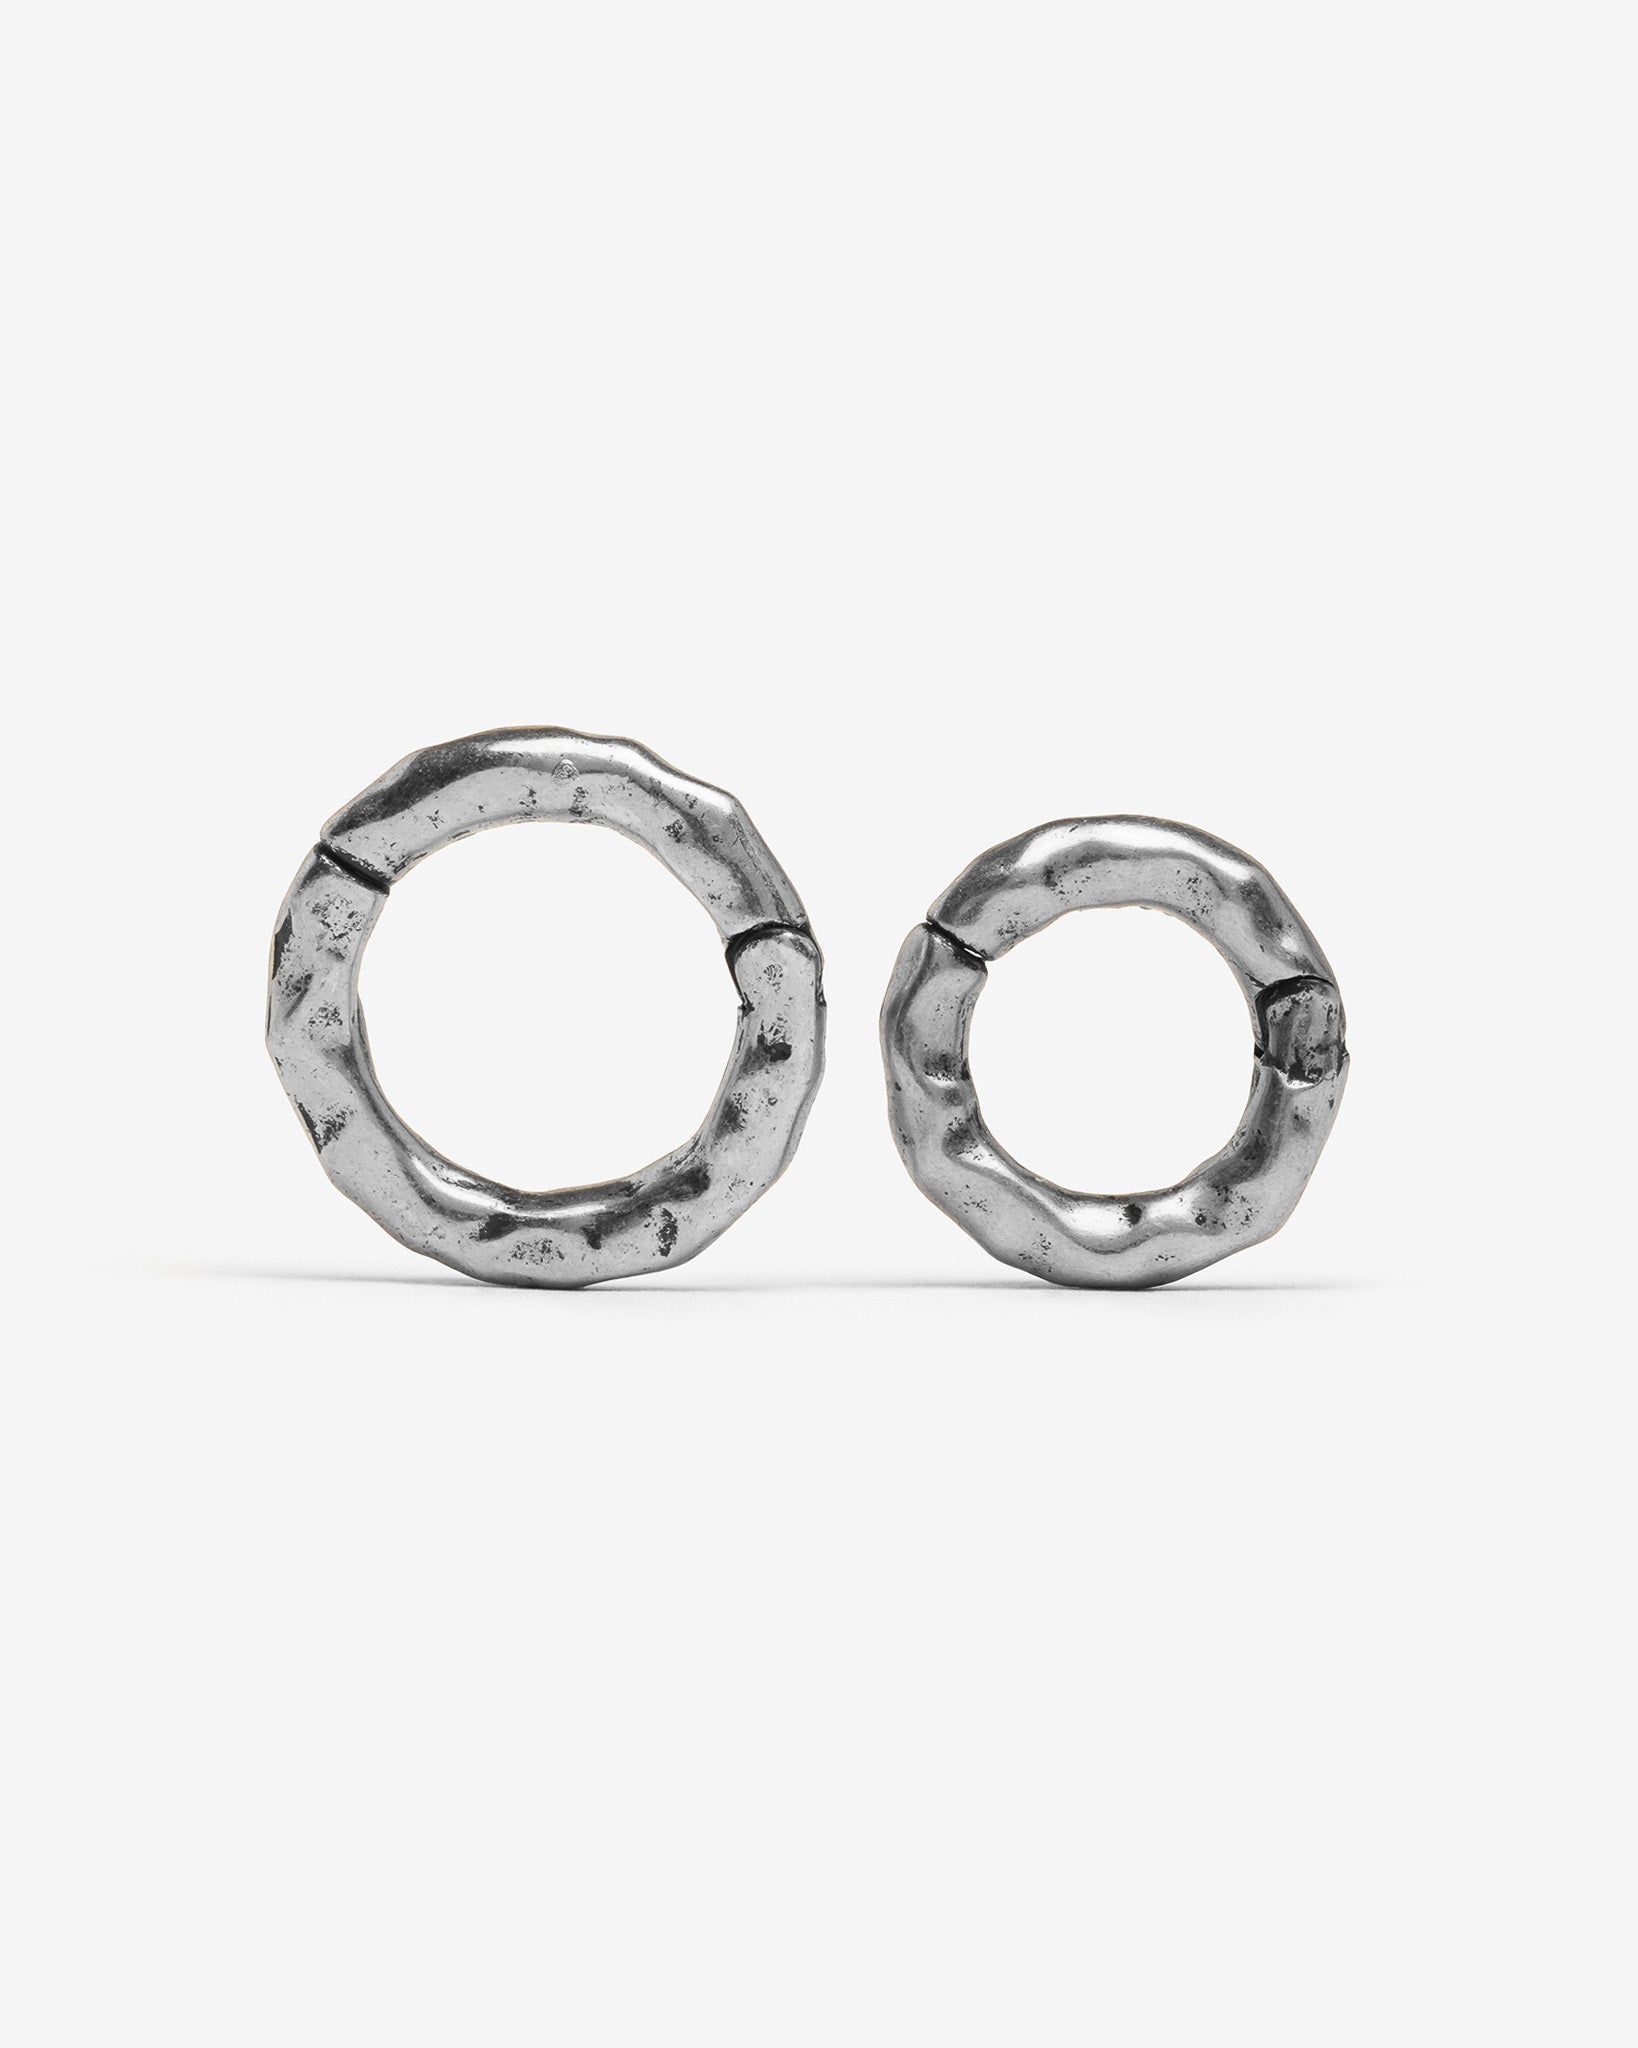 Colossal Ring Stacks in Stainless Steel in Silver - 6mm - Single Ring (No Bundle) - Stretched Ear Jewelry by Ask & Embla